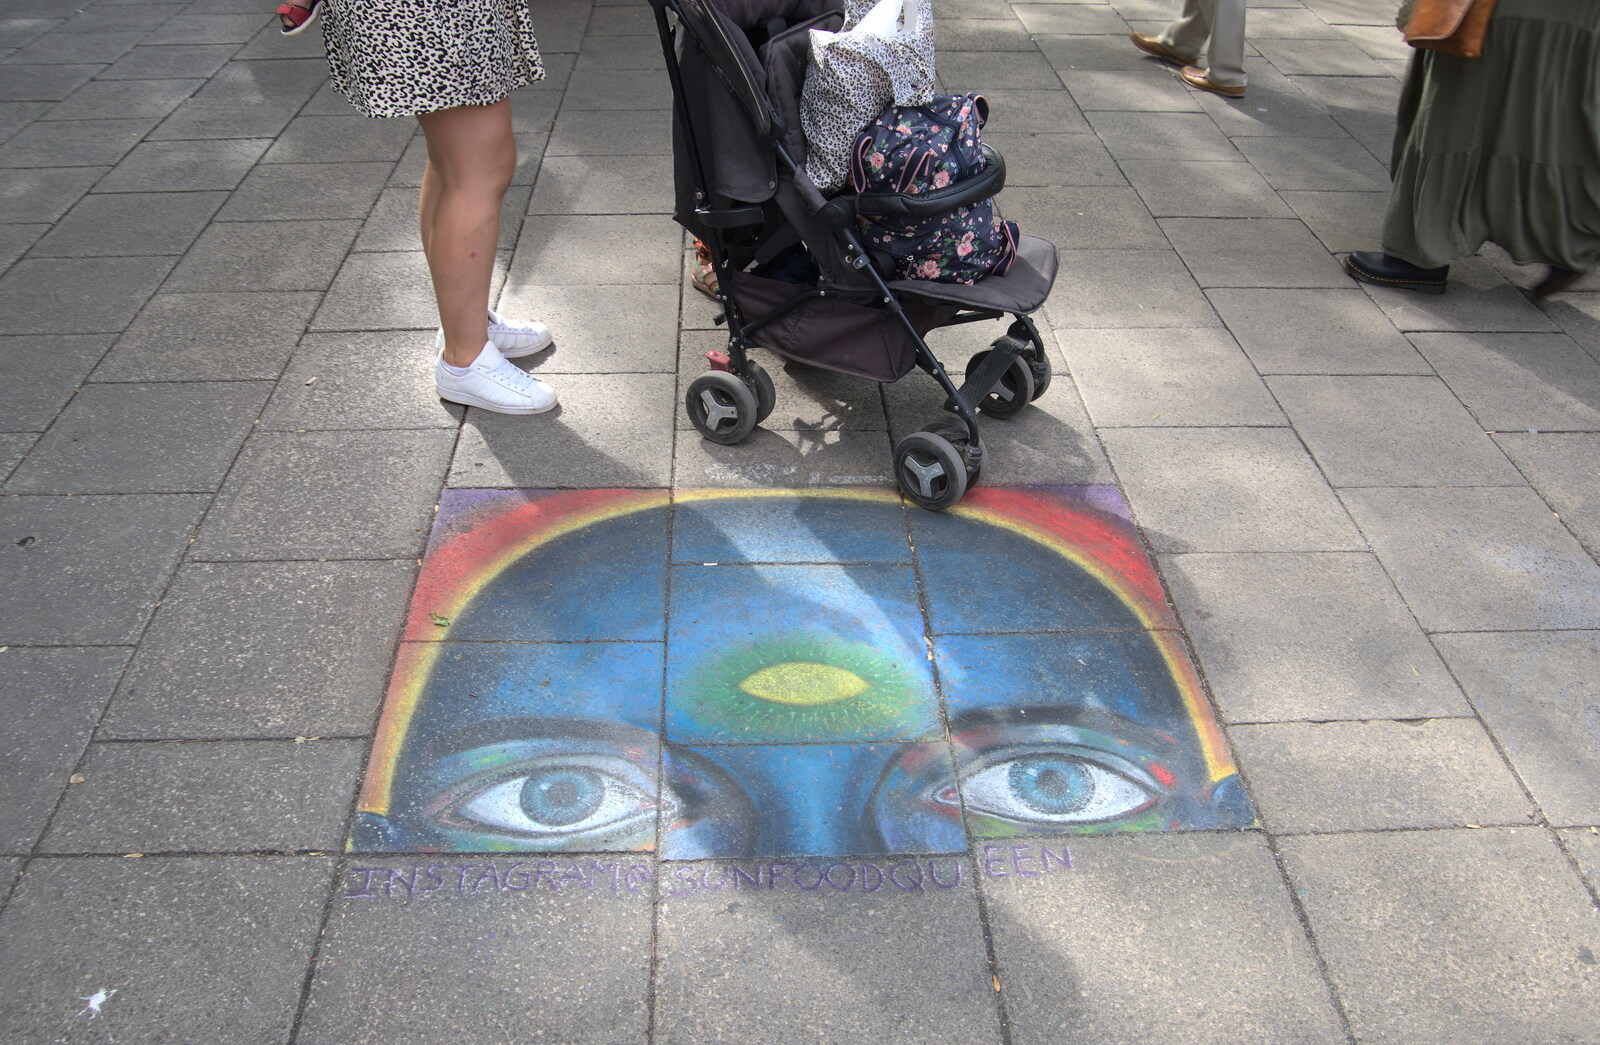 A July Miscellany, Diss, Eye and Norwich - 23rd July 2022: Sunfoodqueen pavement art